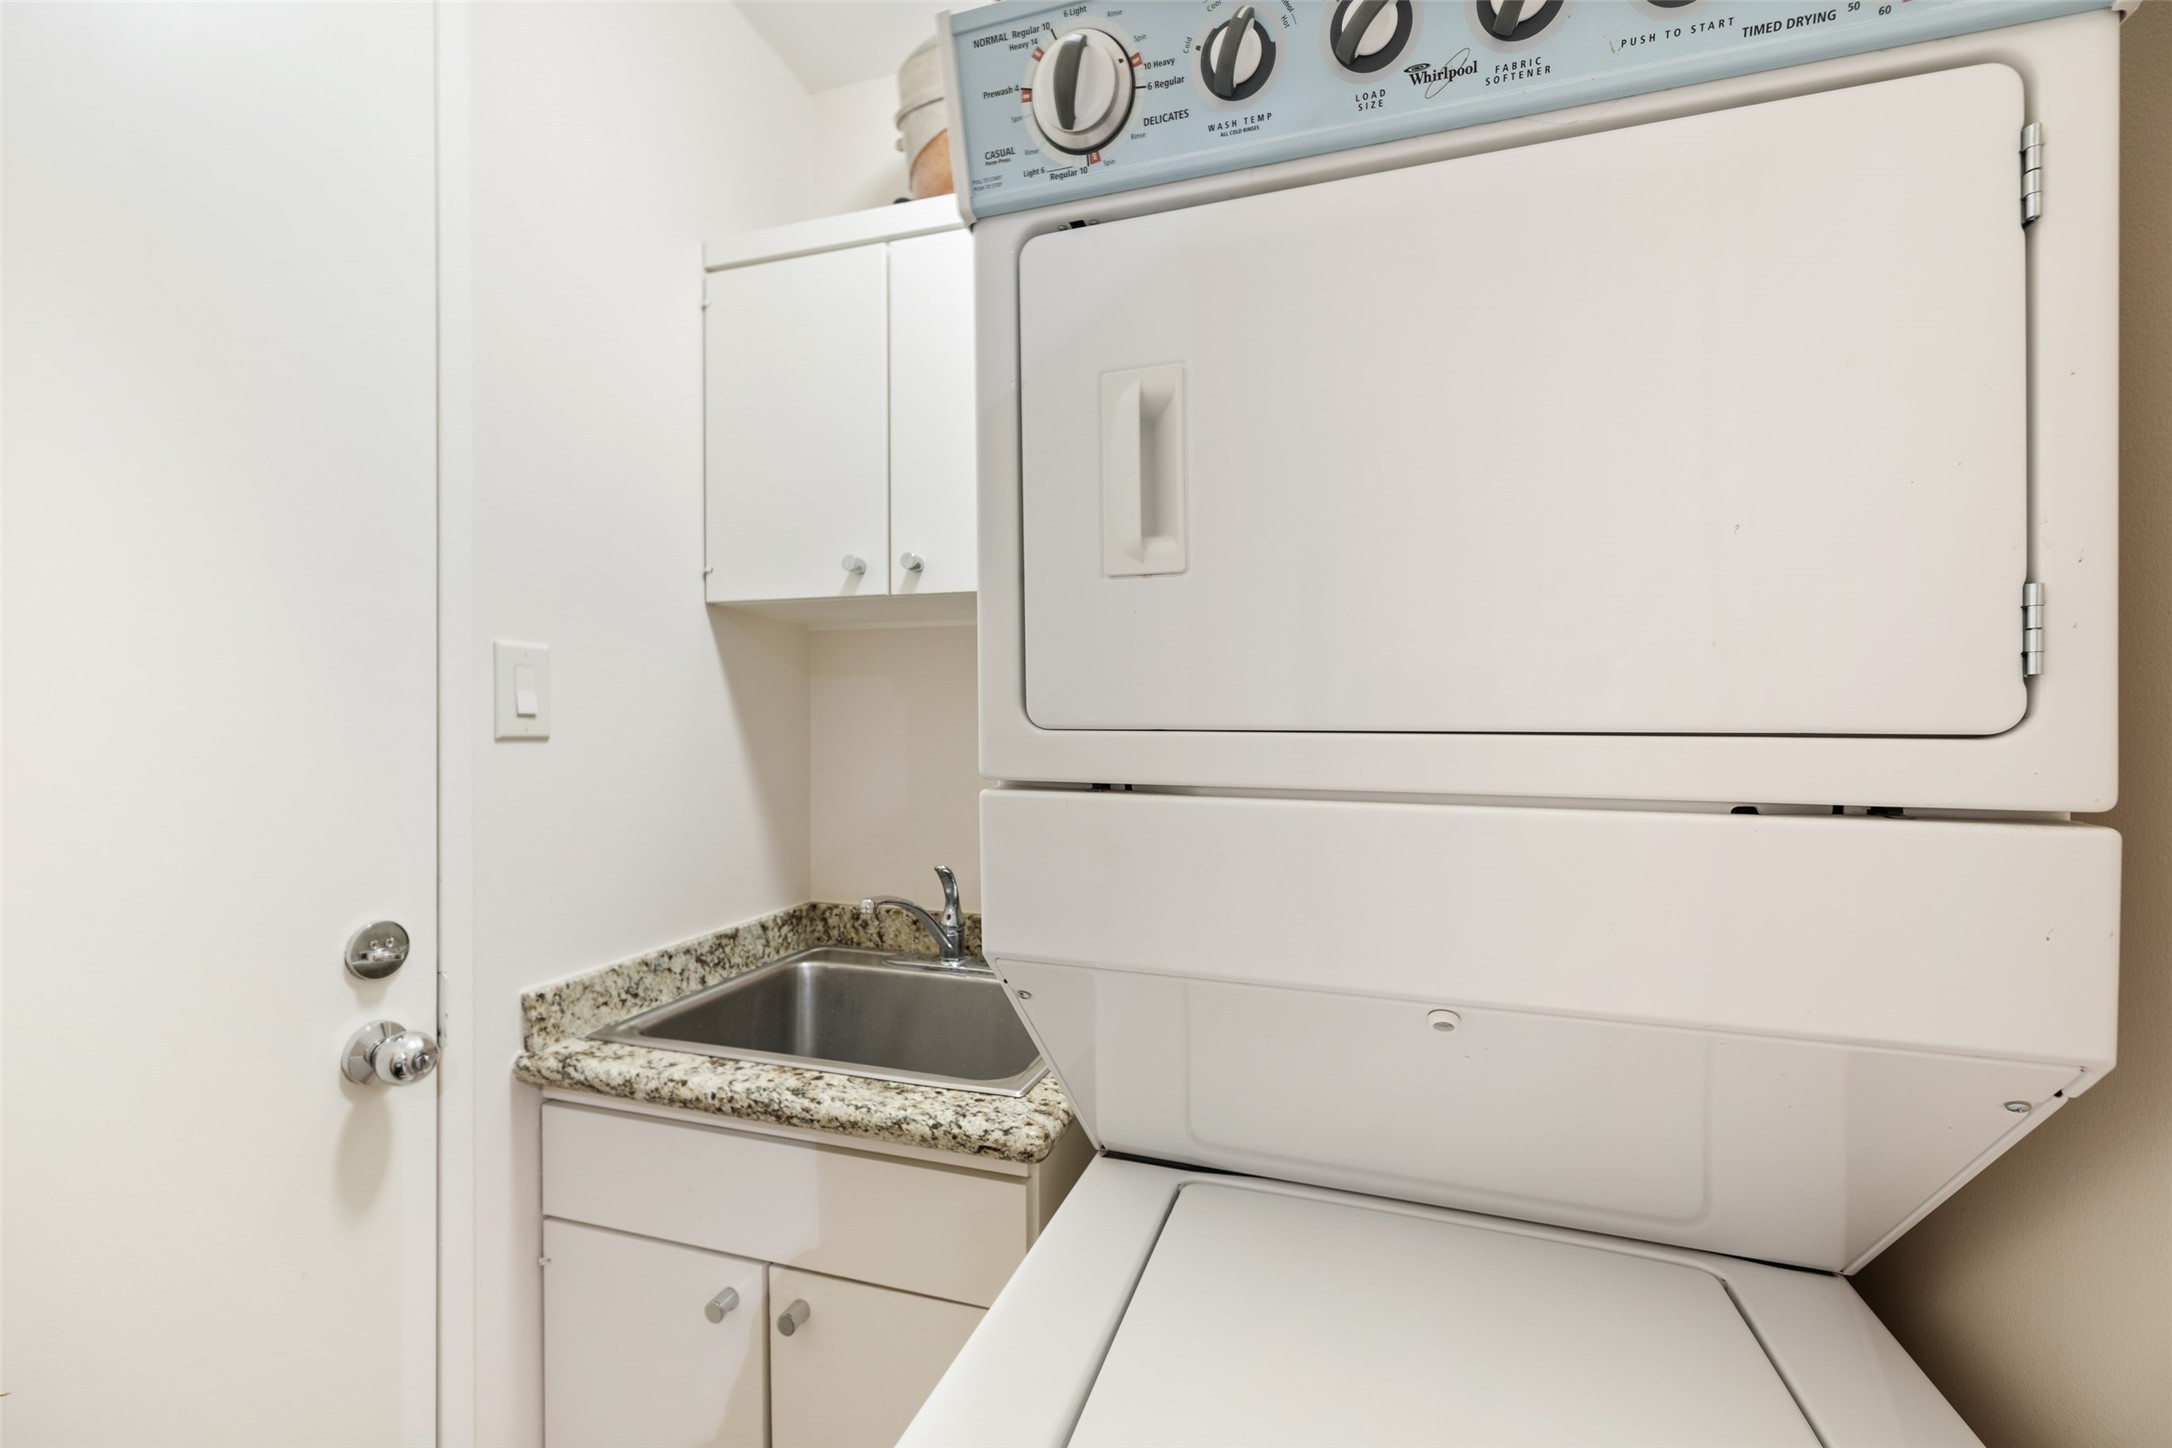 The utility room is designed for a stackable washer and dryer and is equipped with a sink and additional storage.